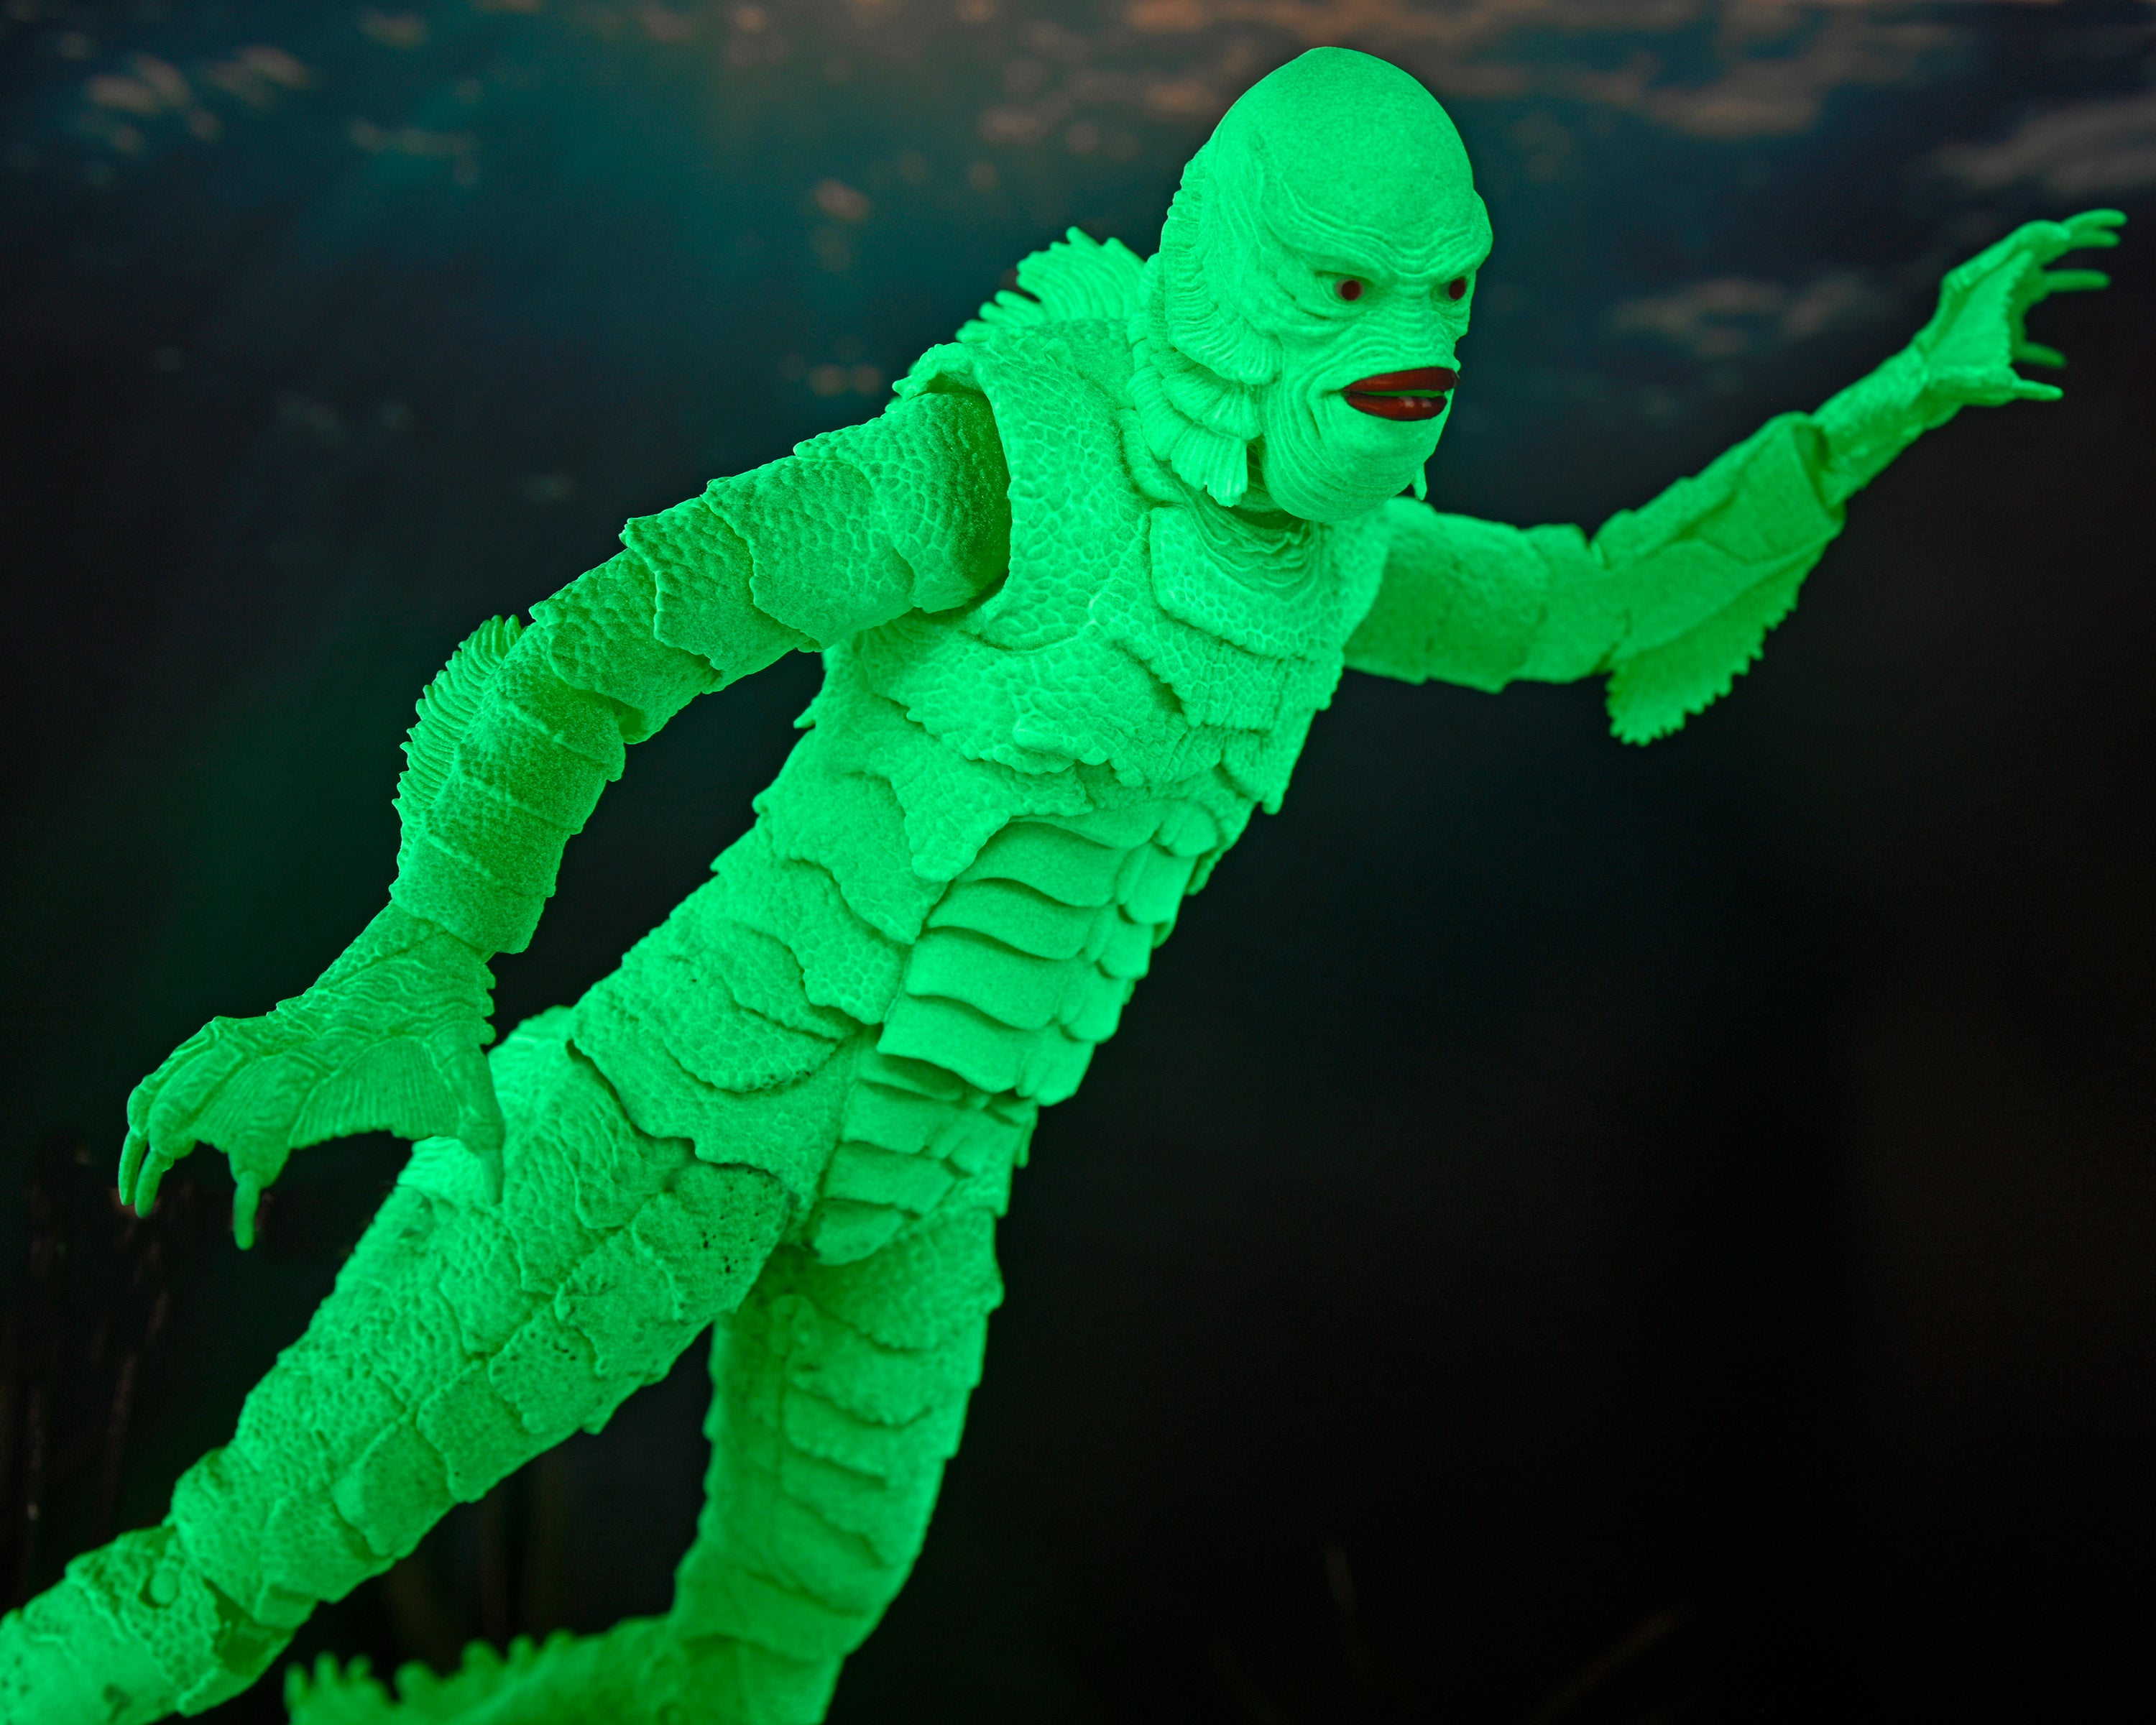 Universal Monsters The Creature from the Black Lagoon Glow in the Dark 7" Scale Action Figure by NECA